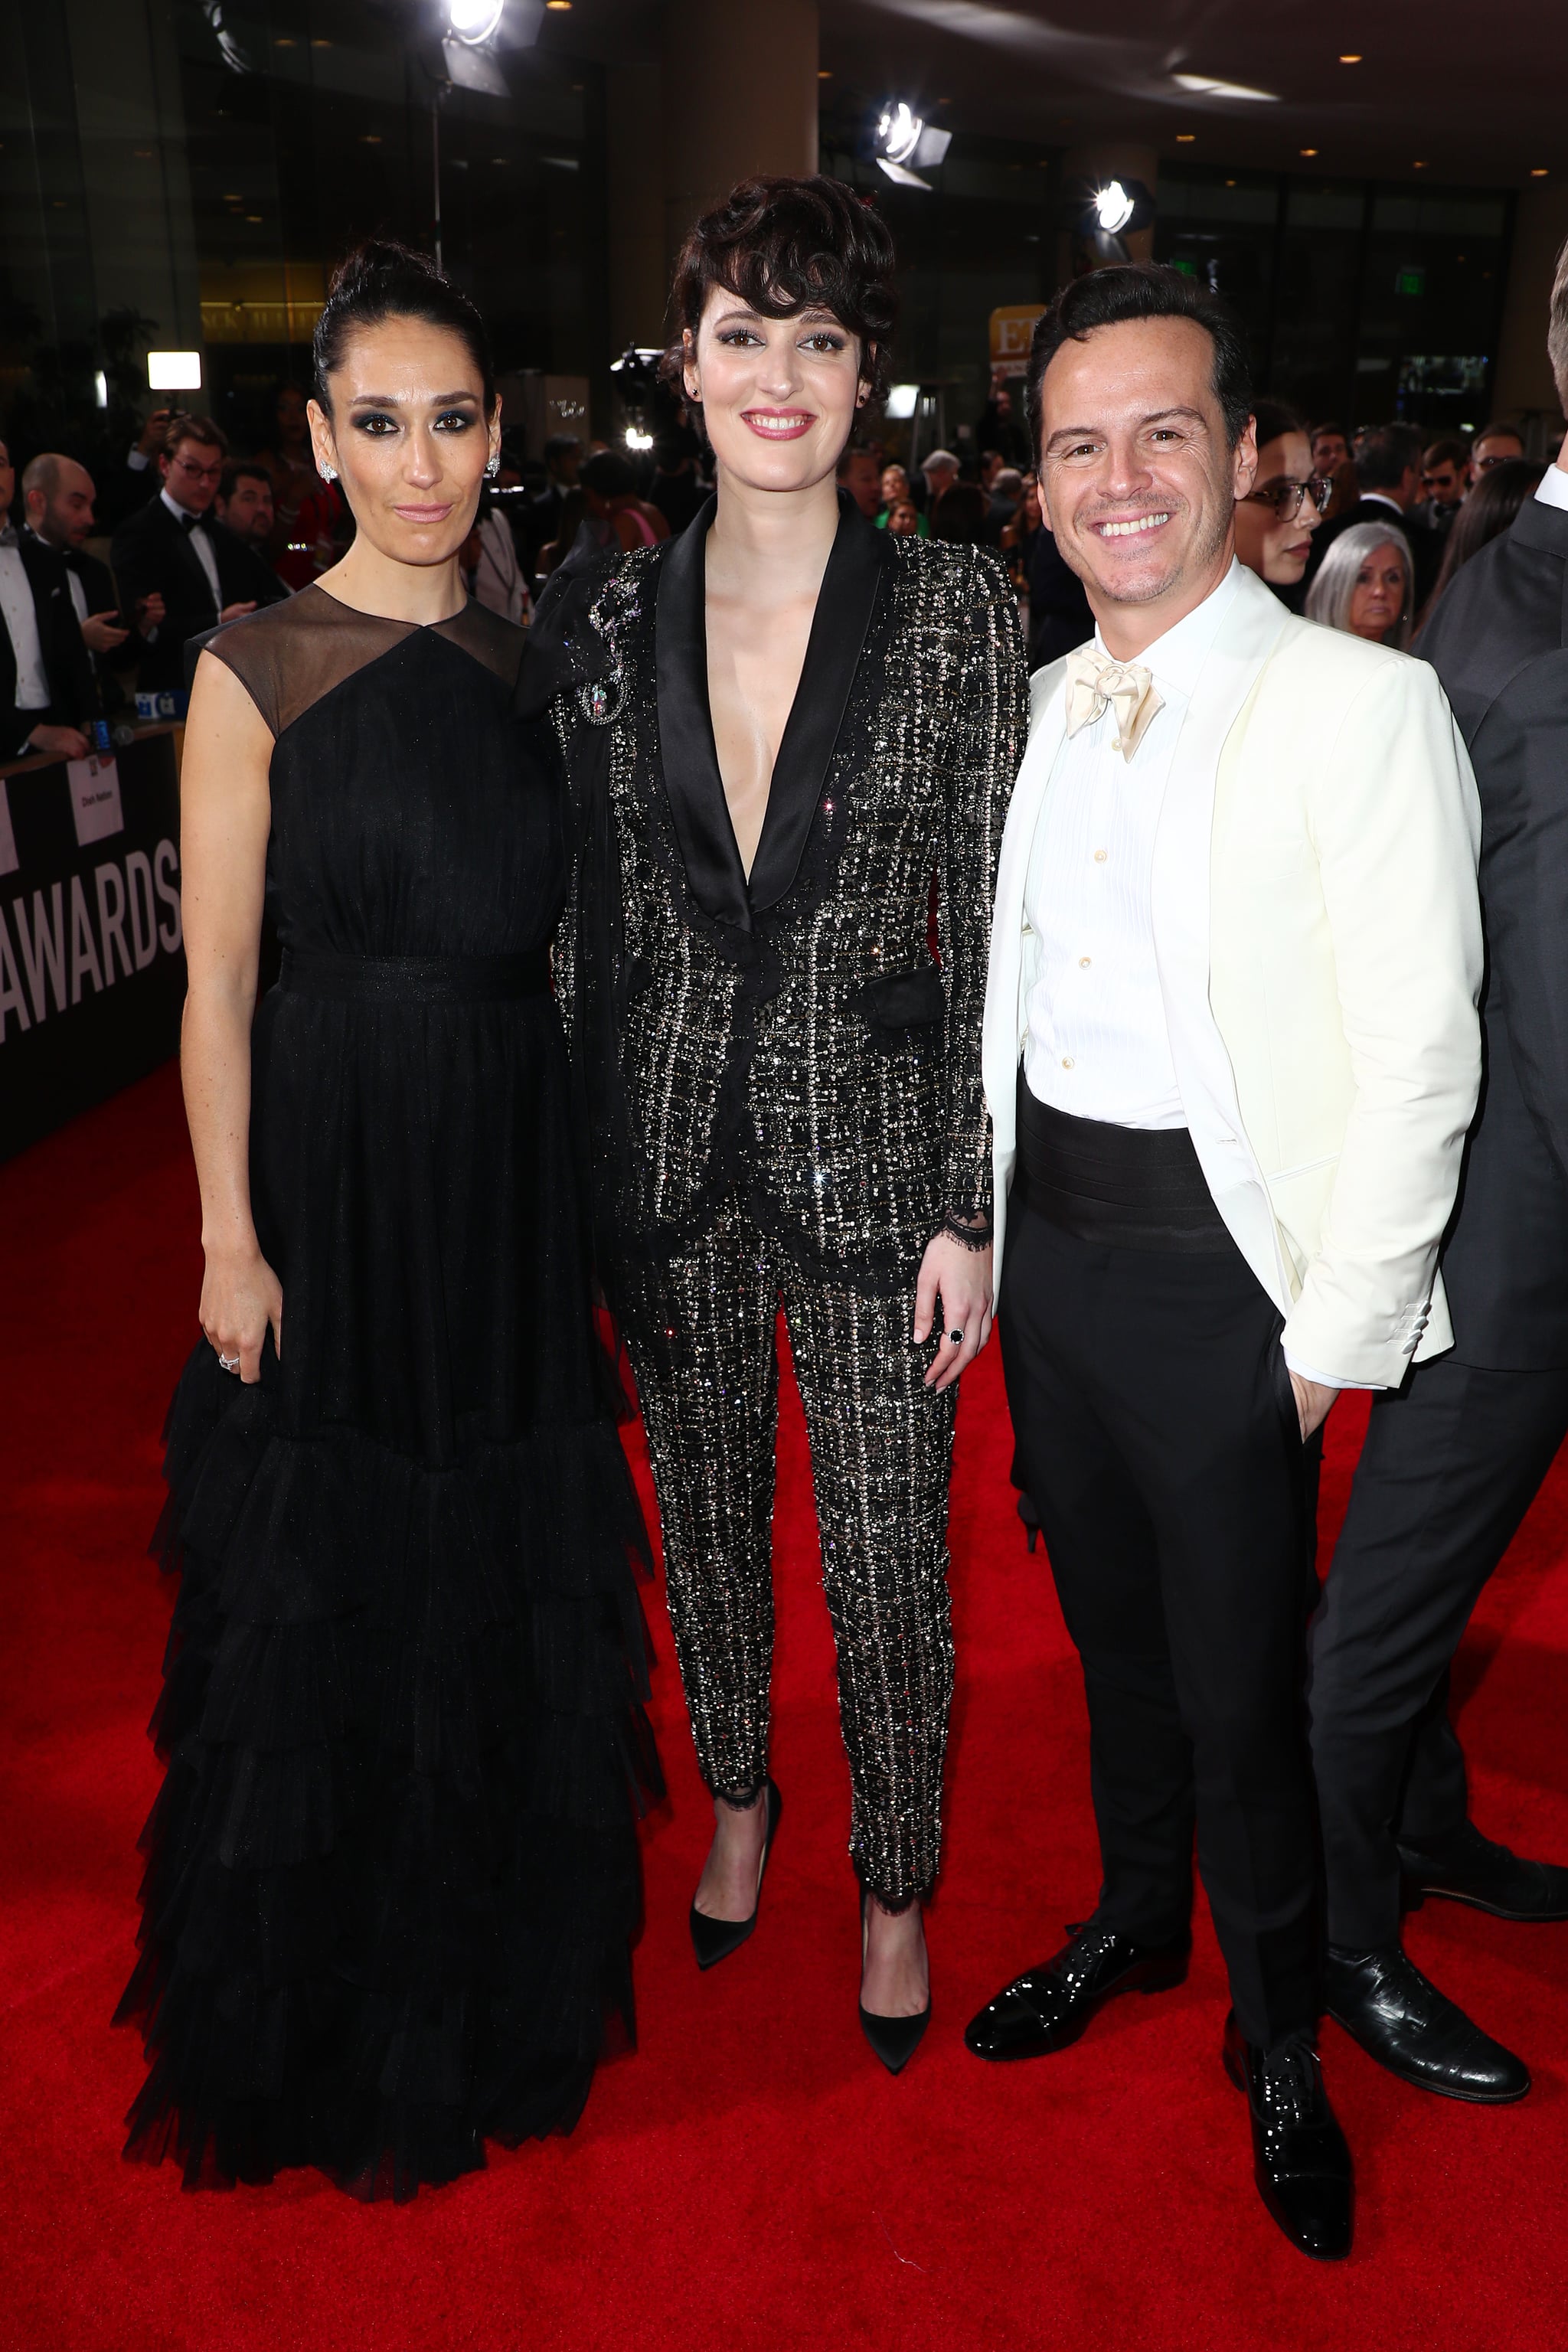 BEVERLY HILLS, CALIFORNIA - JANUARY 05: (L-R) Sian Clifford, Phoebe Waller-Bridge, and Andrew Scott attend the 77th Annual Golden Globe Awards at The Beverly Hilton Hotel on January 05, 2020 in Beverly Hills, California. (Photo by Joe Scarnici/Getty Images for Moët and Chandon )